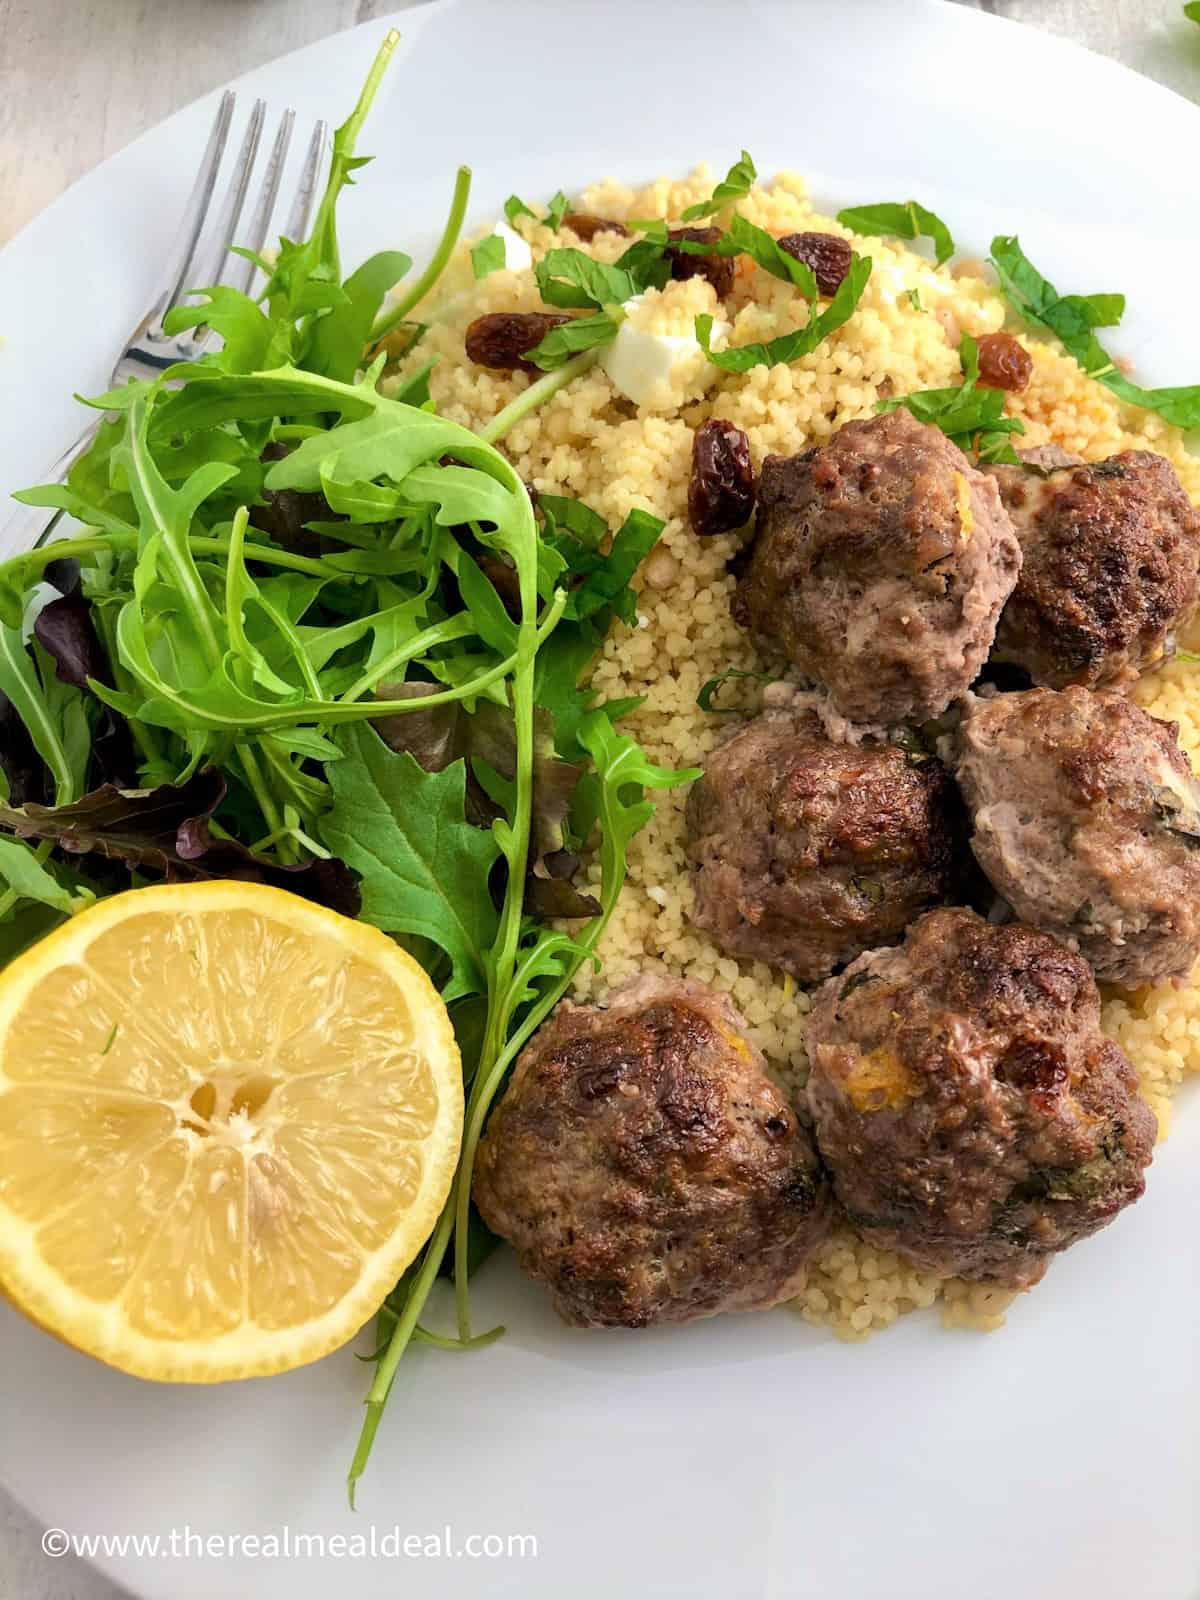 lamb meatballs served on bed couscous with apricots and sultanas and green salad and lemon half